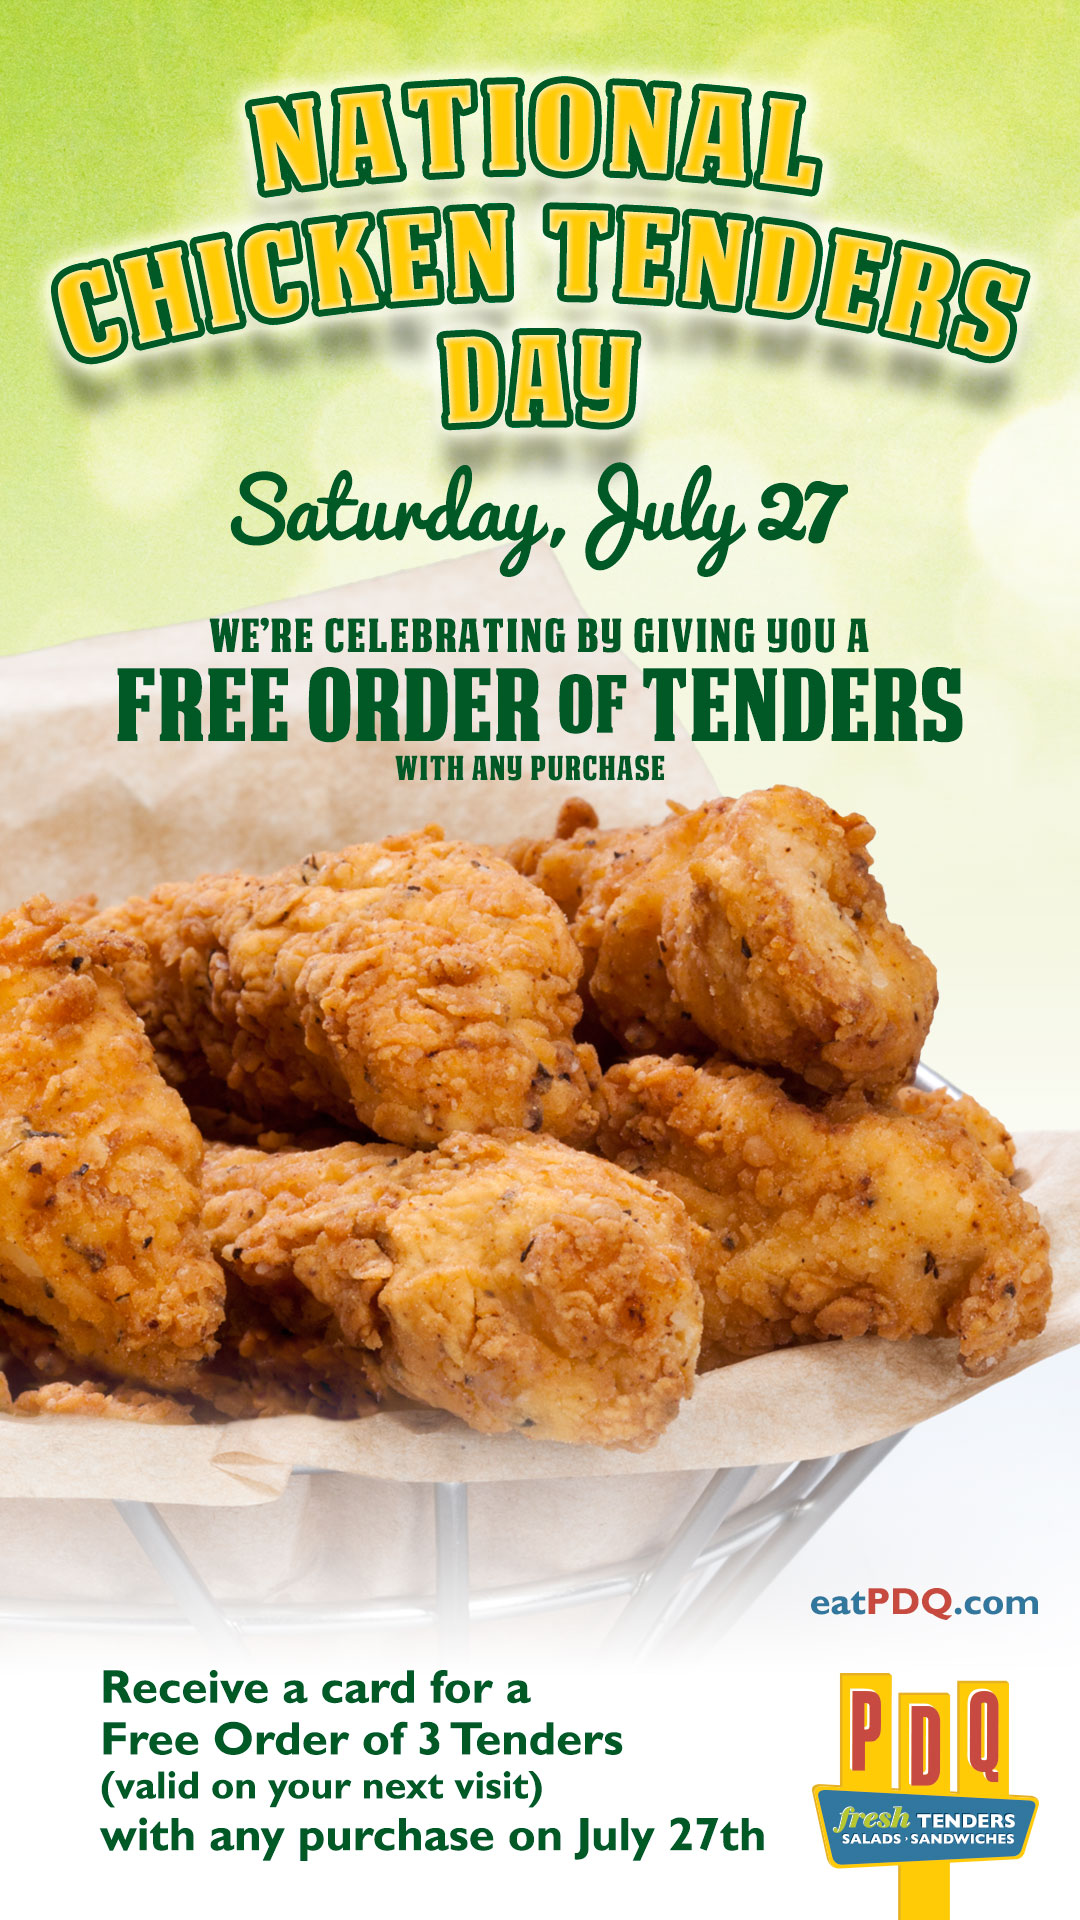 PDQ National Chicken Tenders Day